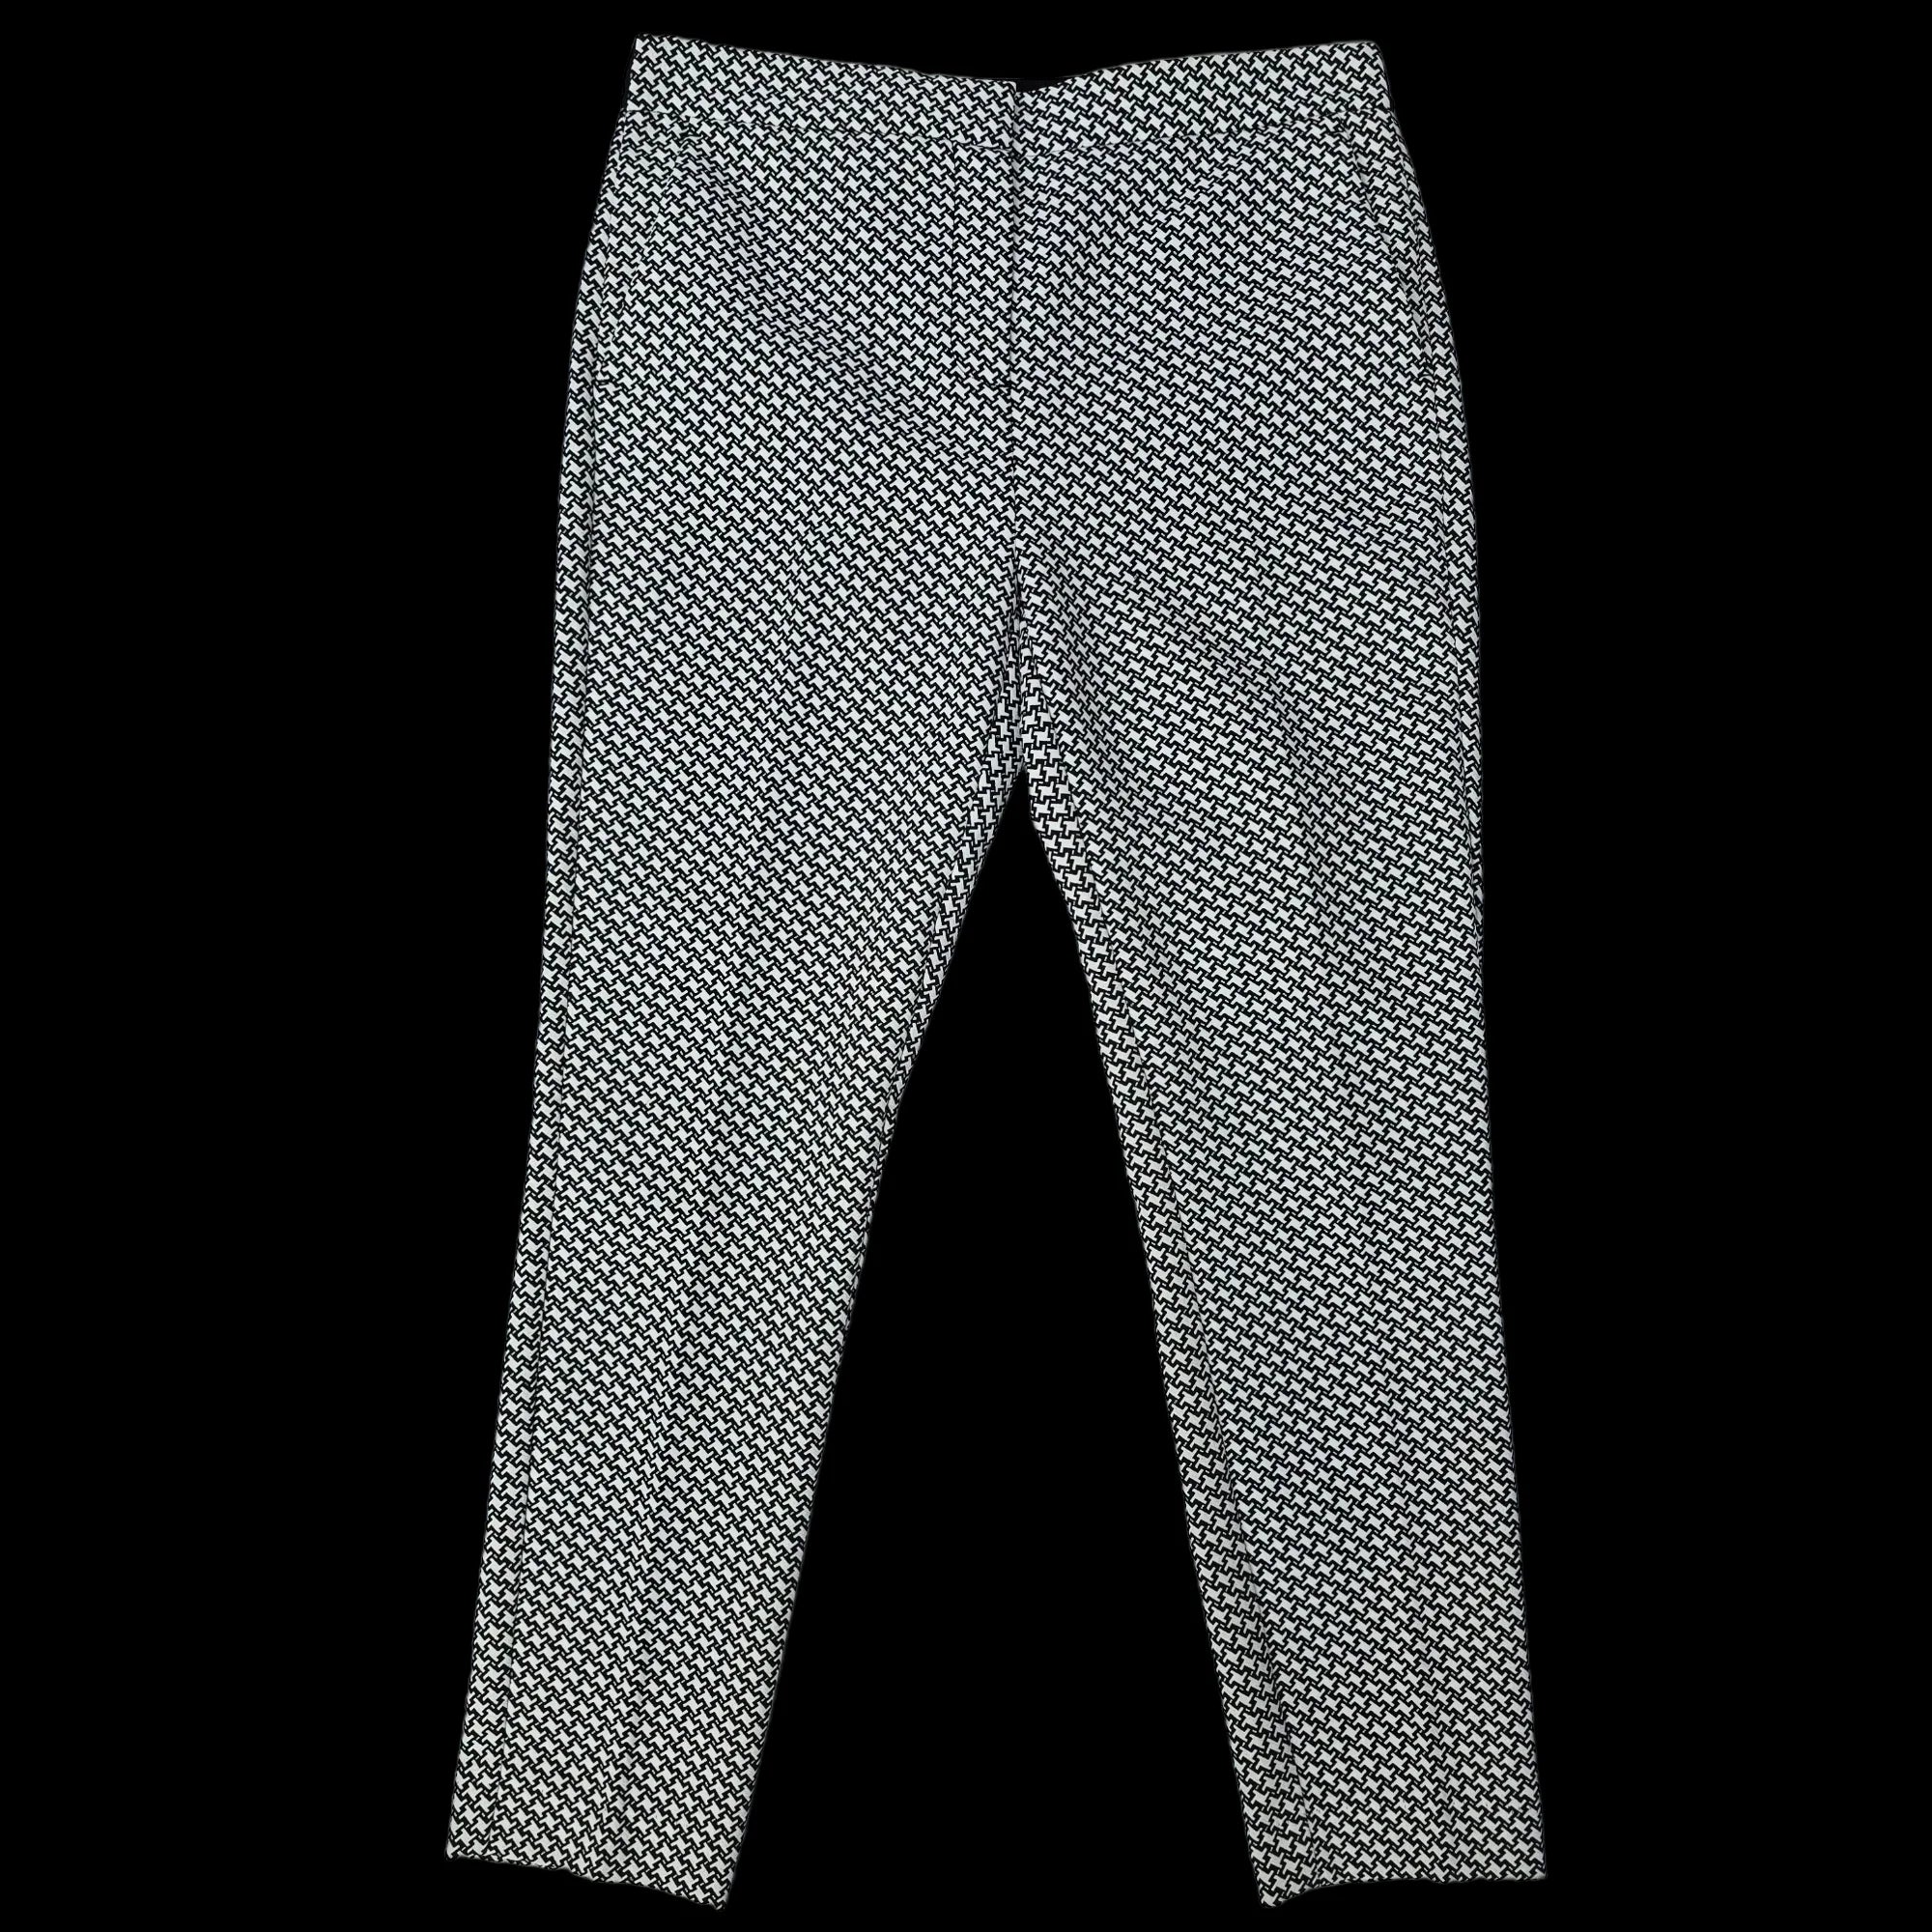 Womens Next Black And White Ankle Trousers UK 10R - 3 - 3598